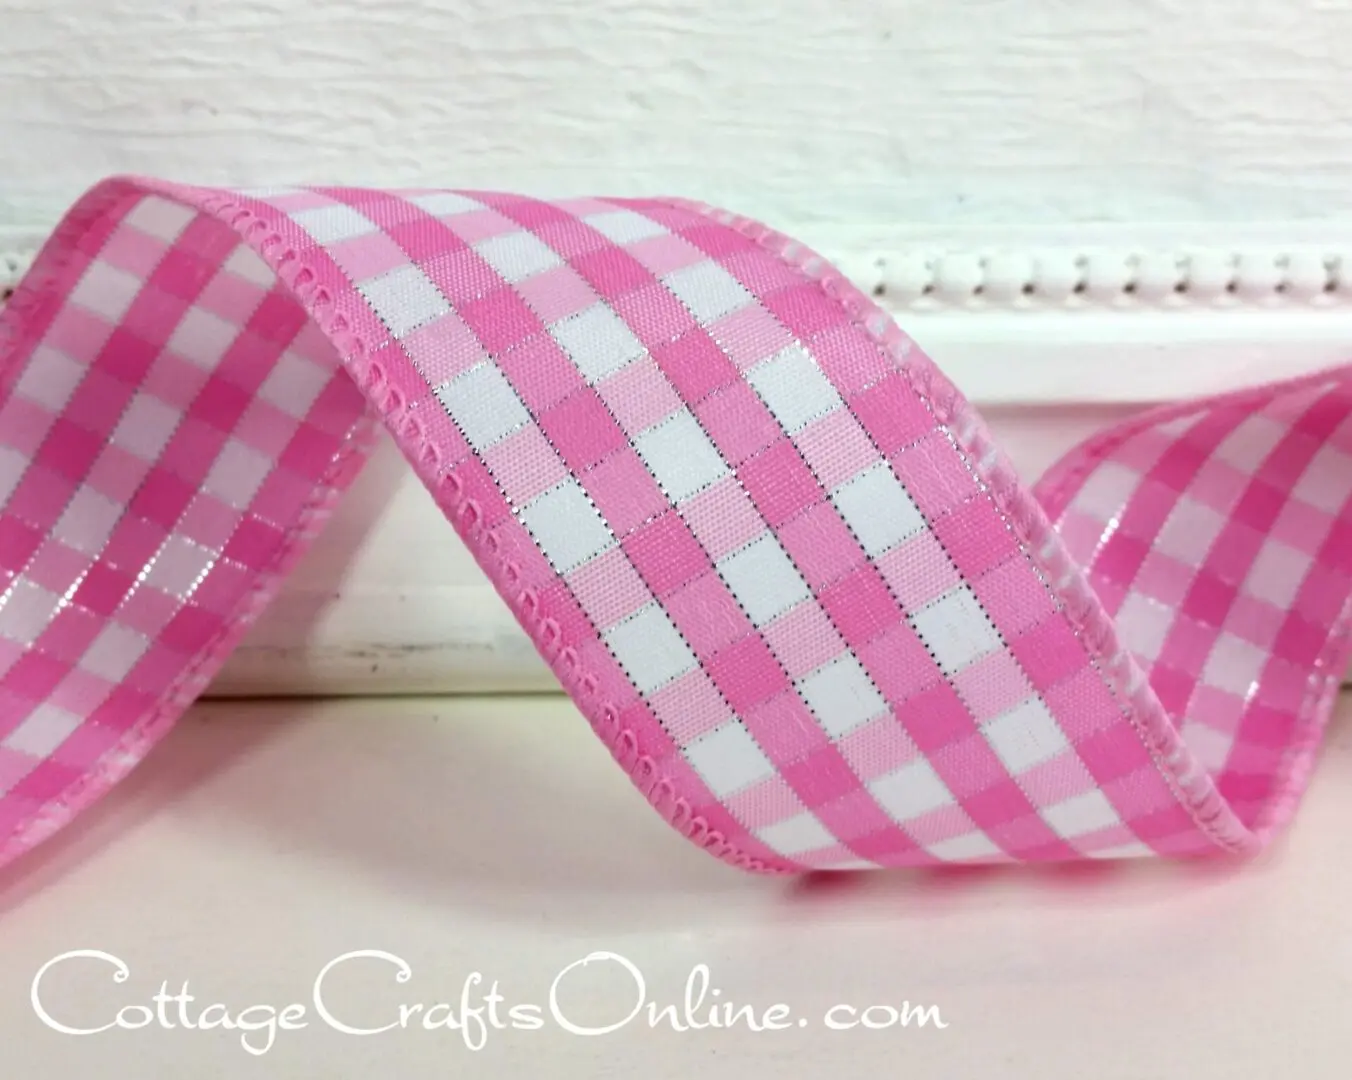 A pink and white checkered ribbon sitting on top of a table.